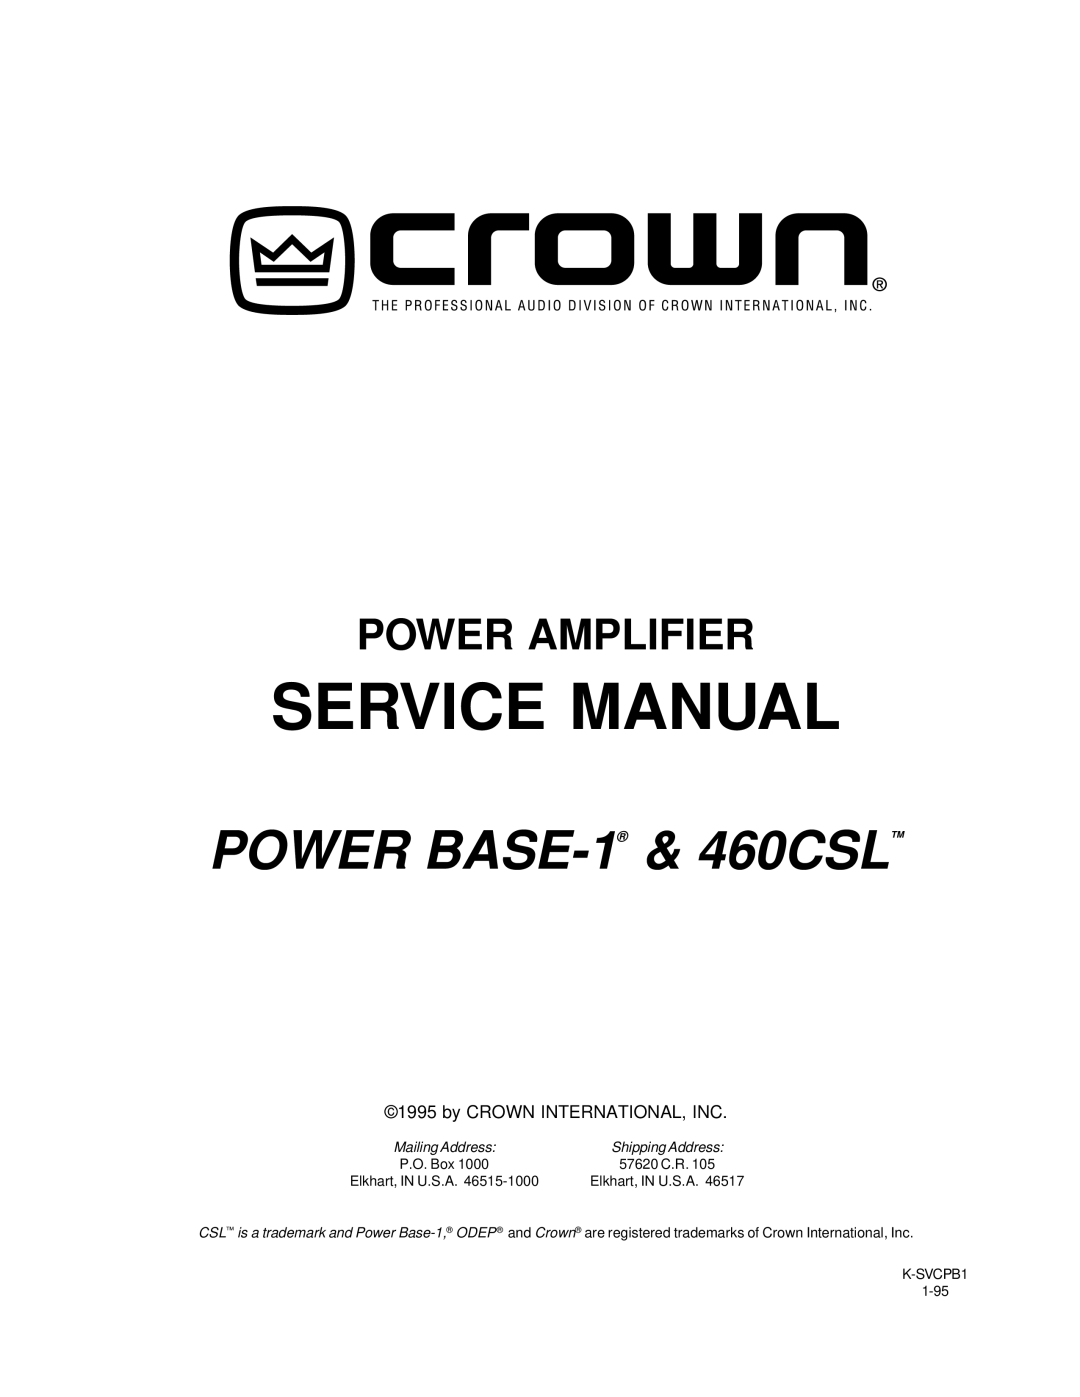 Crown service manual POWER BASE-1 & 460CSL, Power Amplifier, Elkhart, IN U.S.A, K-SVCPB1, Mailing Address, P.O. Box 